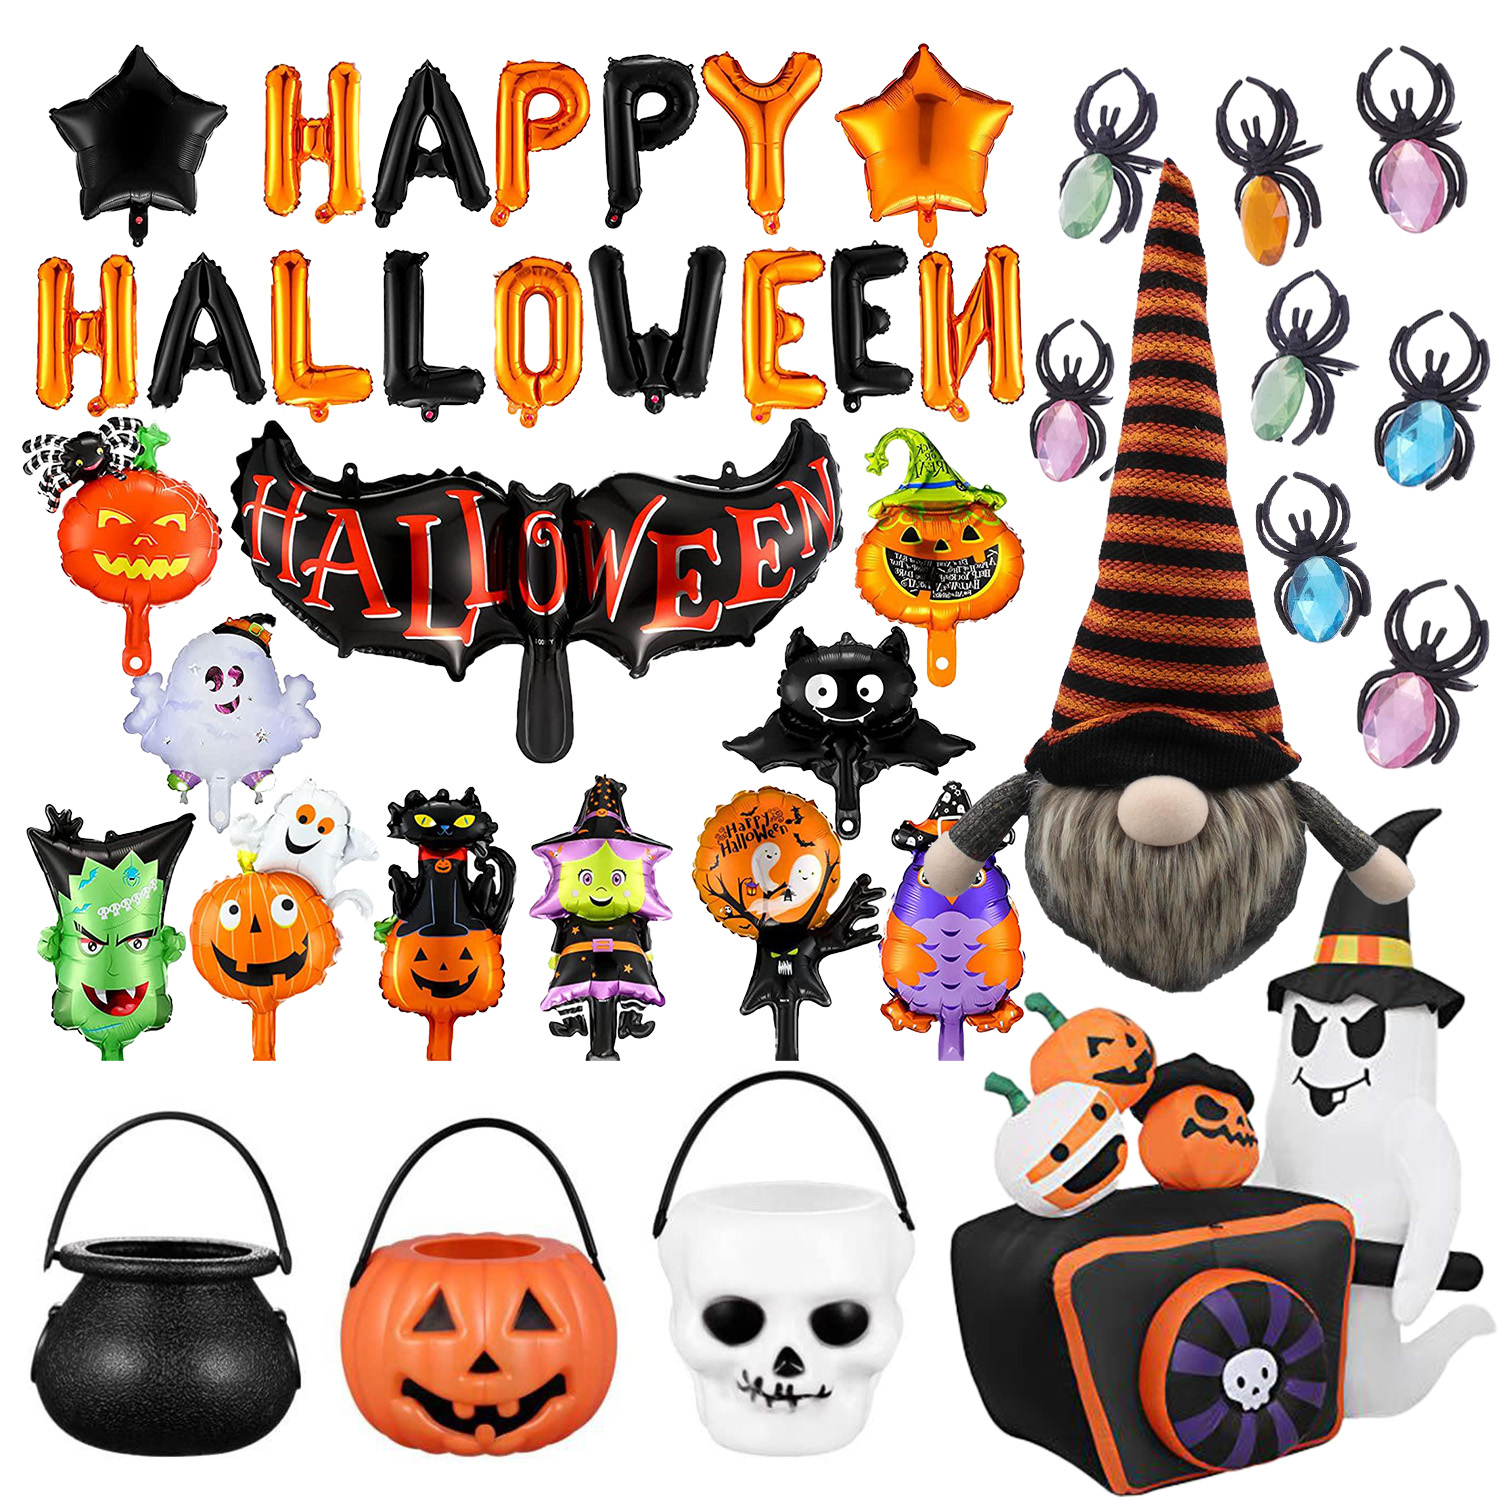 Halloween Decoration Balloons, Gnomes, Ghost Projection Light, Pumpkin Candy Buckets, and More!